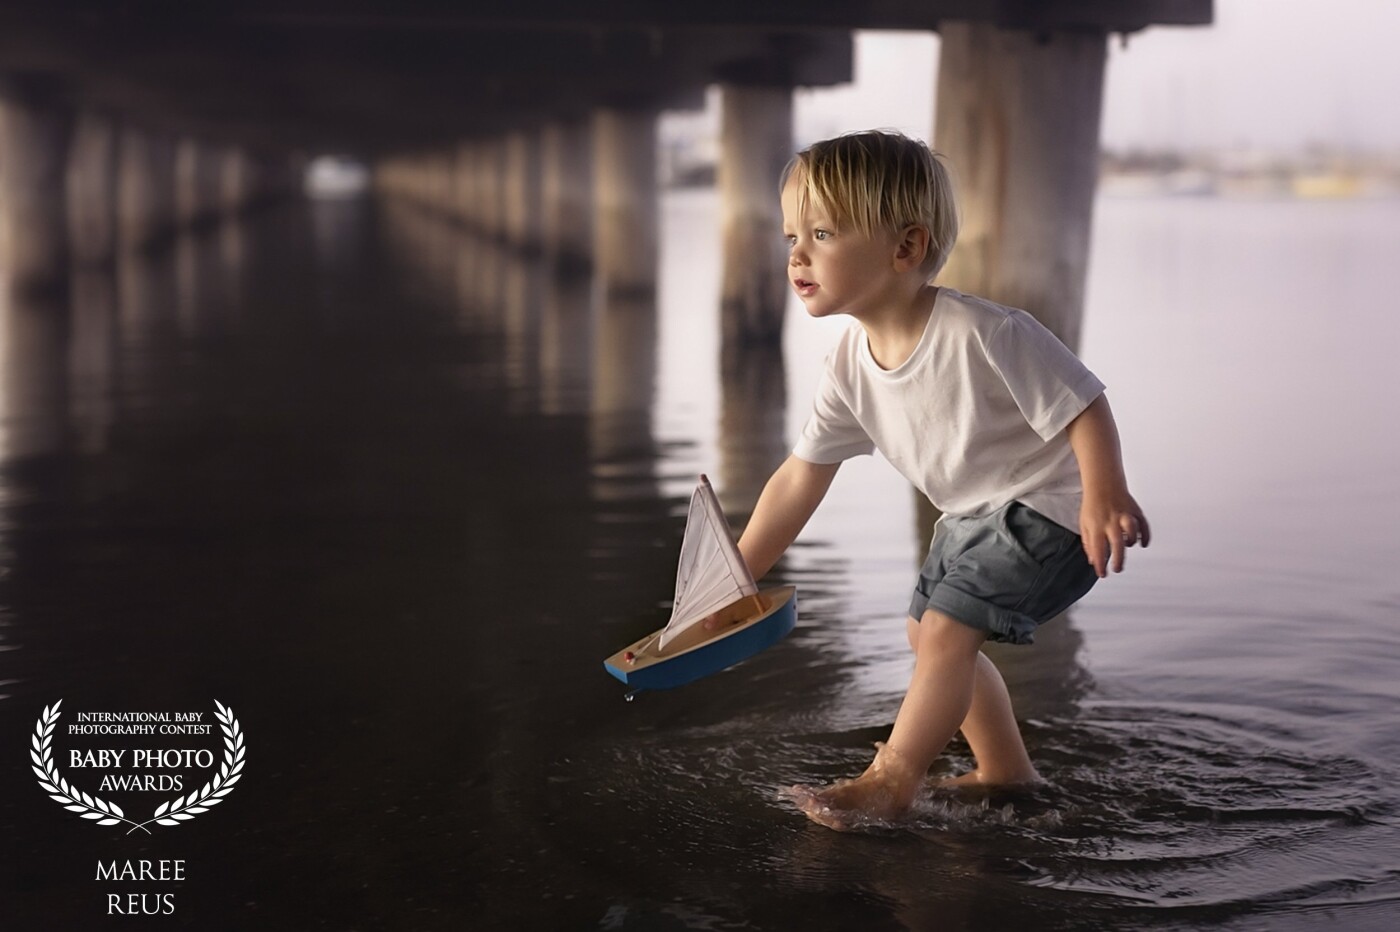 This little boy loves all things boating as his father sails yachts. This photo was taken just after sunset, under a pier in Melbourne, I just love the focus in his eyes as he sails off into the sunset.